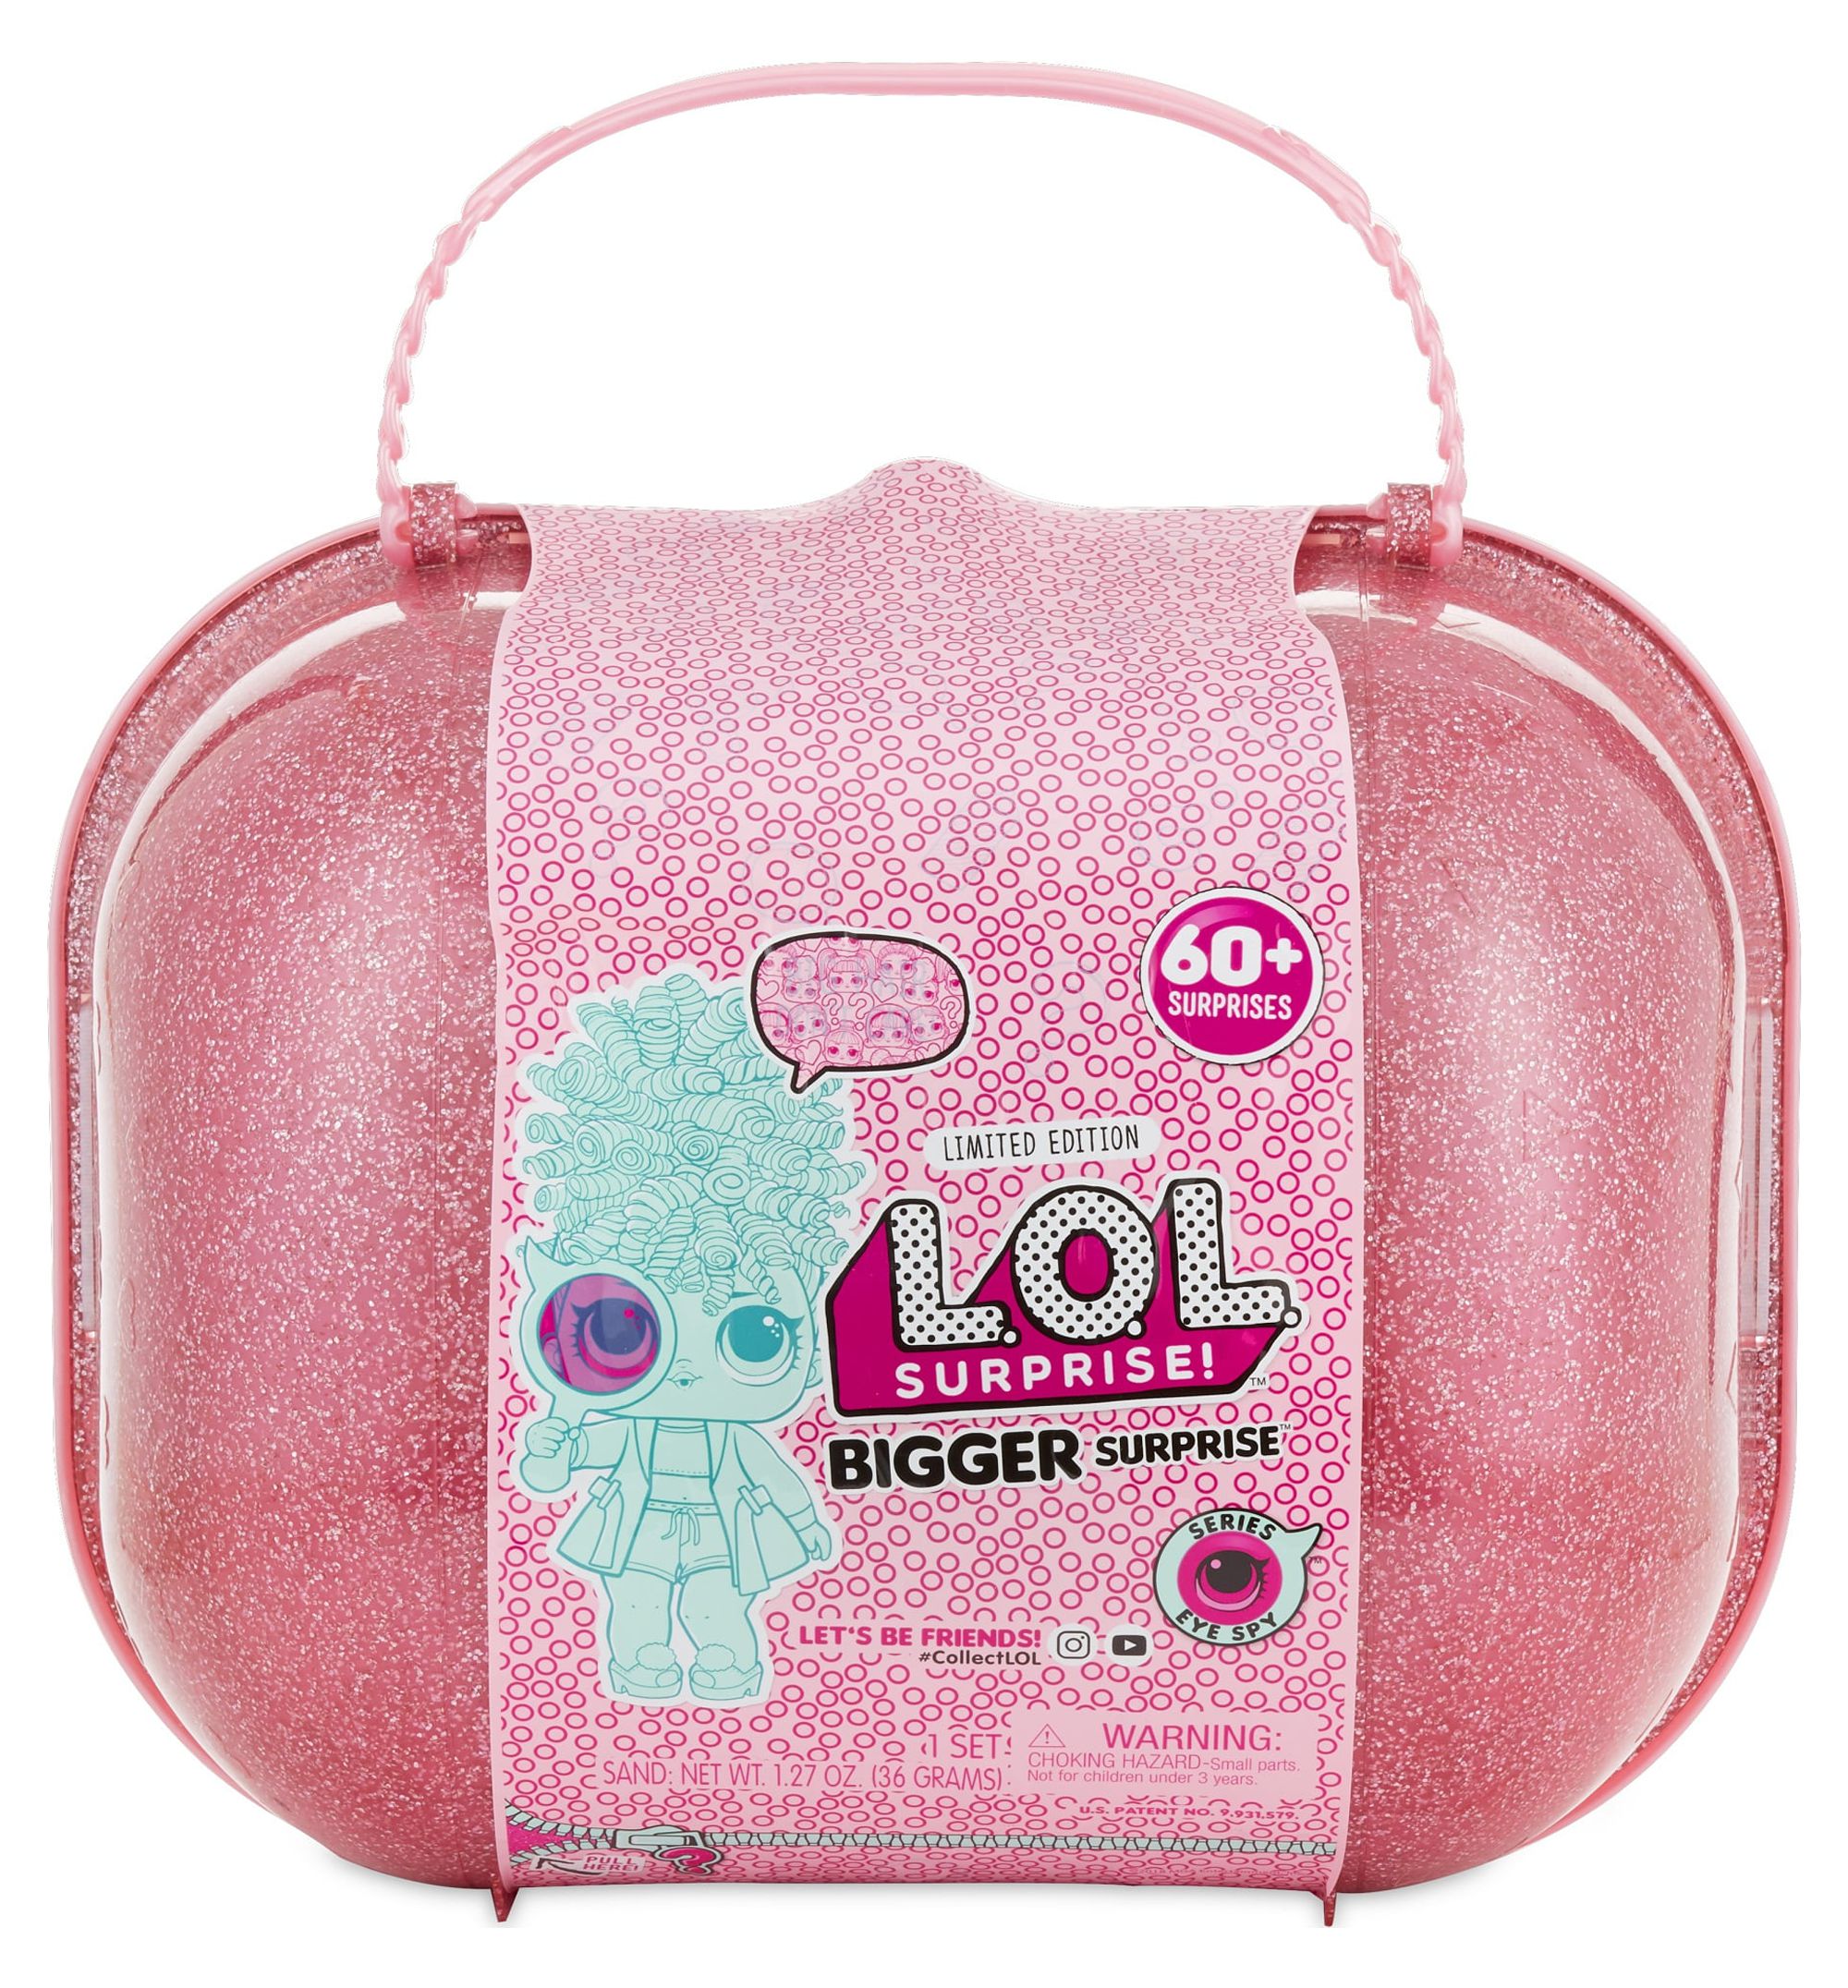 LOL Surprise Bigger Surprise Limited Edition 2 Dolls, 1 Pet, 1 Lil Sis with 60 Surprises, Ages 4 and up - image 1 of 6